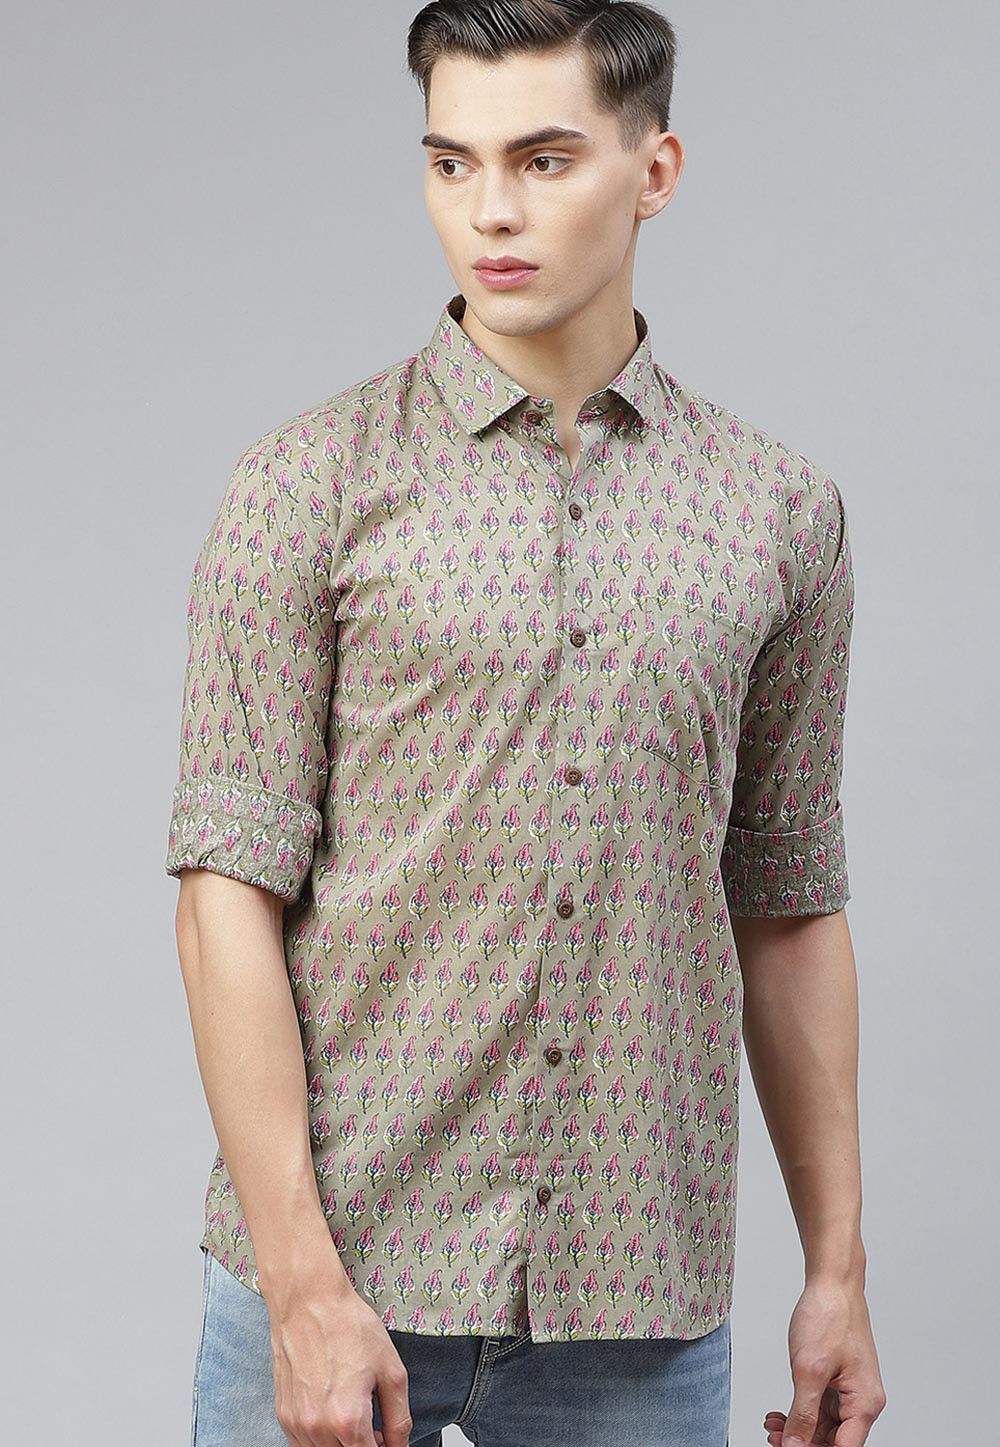 Block Printed Cotton Shirt in Fawn : MRE85